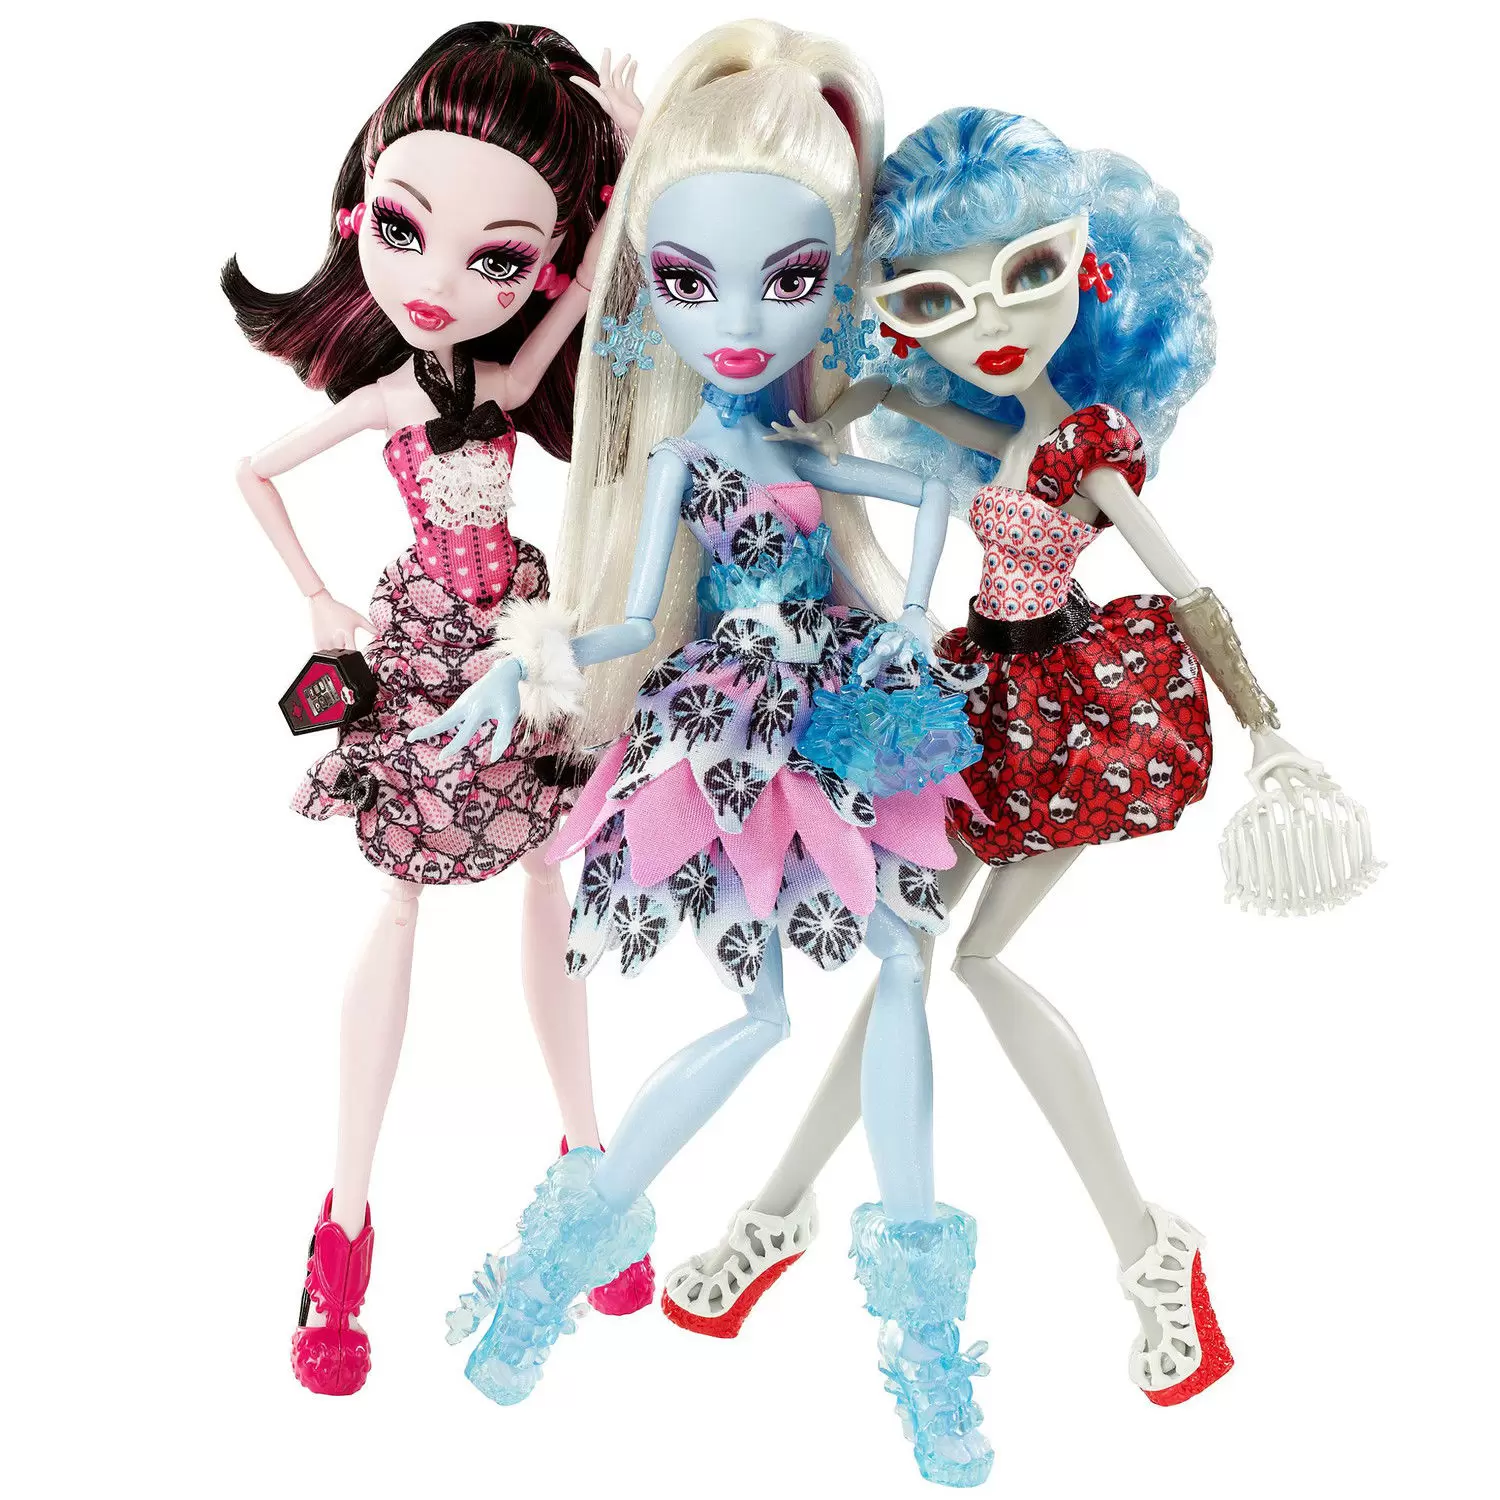 Monster High Dolls - Draculaura, Abbey Bominable & Ghoulia Yelps (3-pack) - Dot Dead Gorgeous